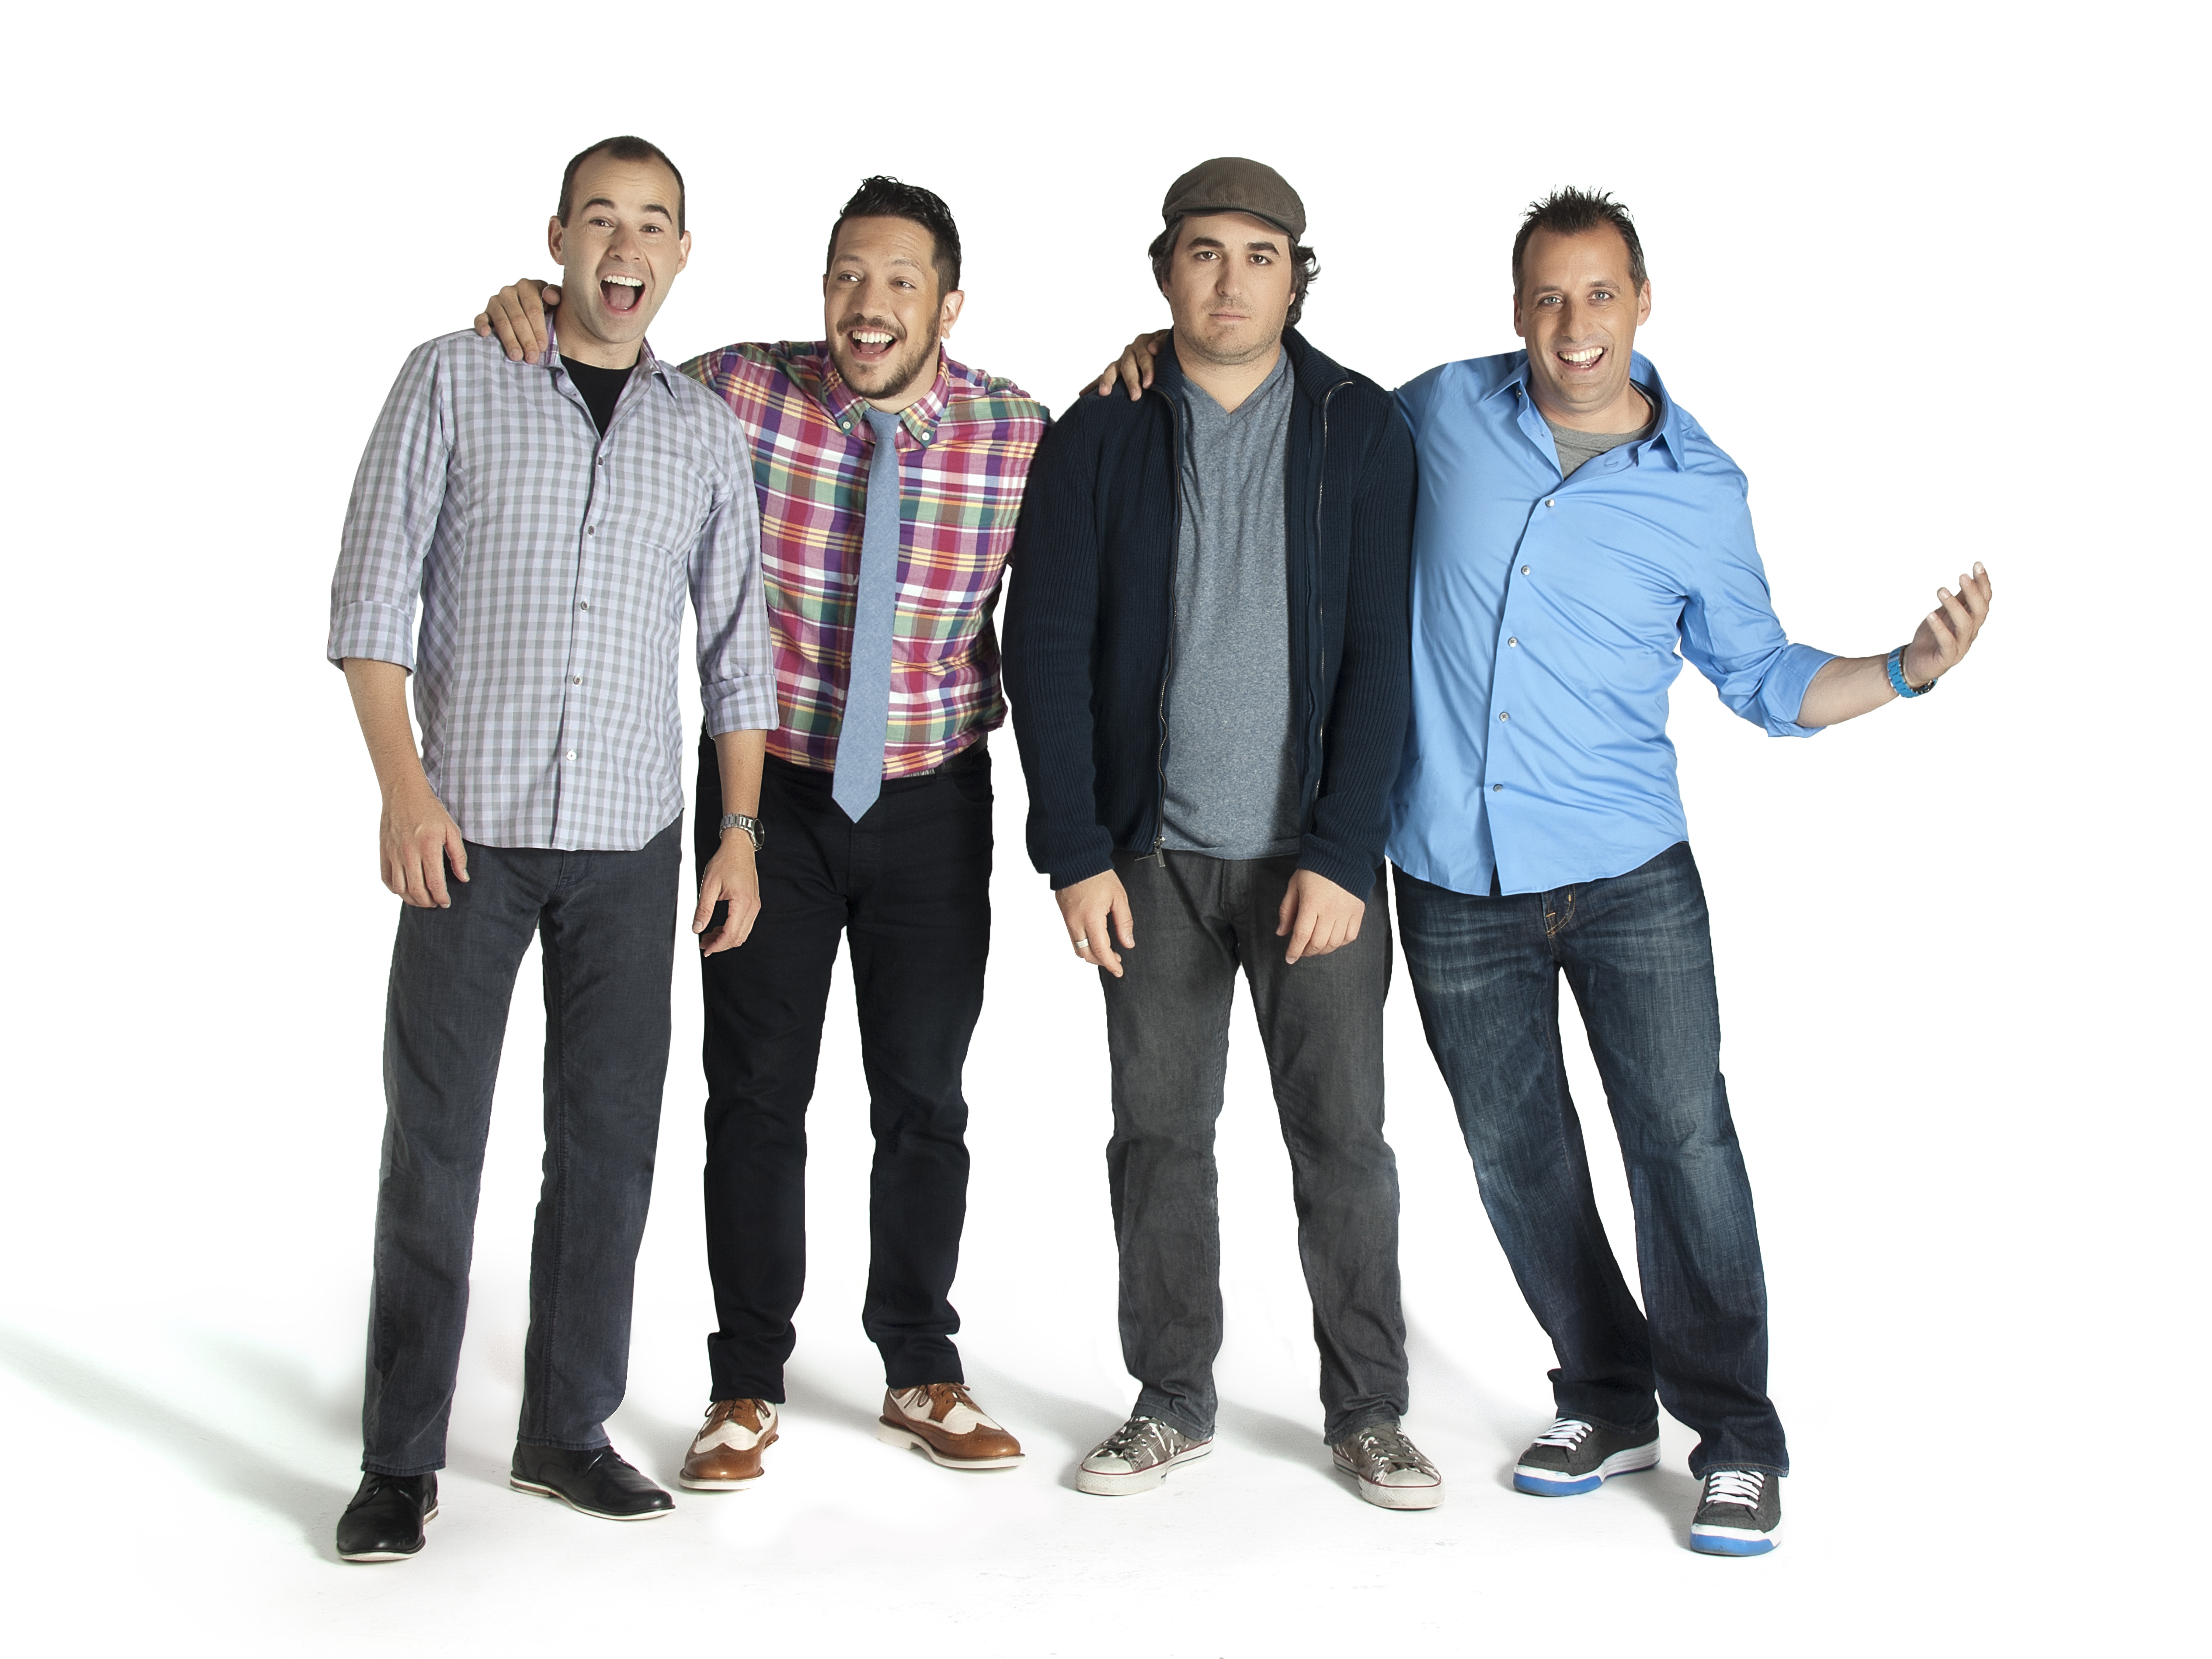 Impractical Jokers The Complete First Season Dvd